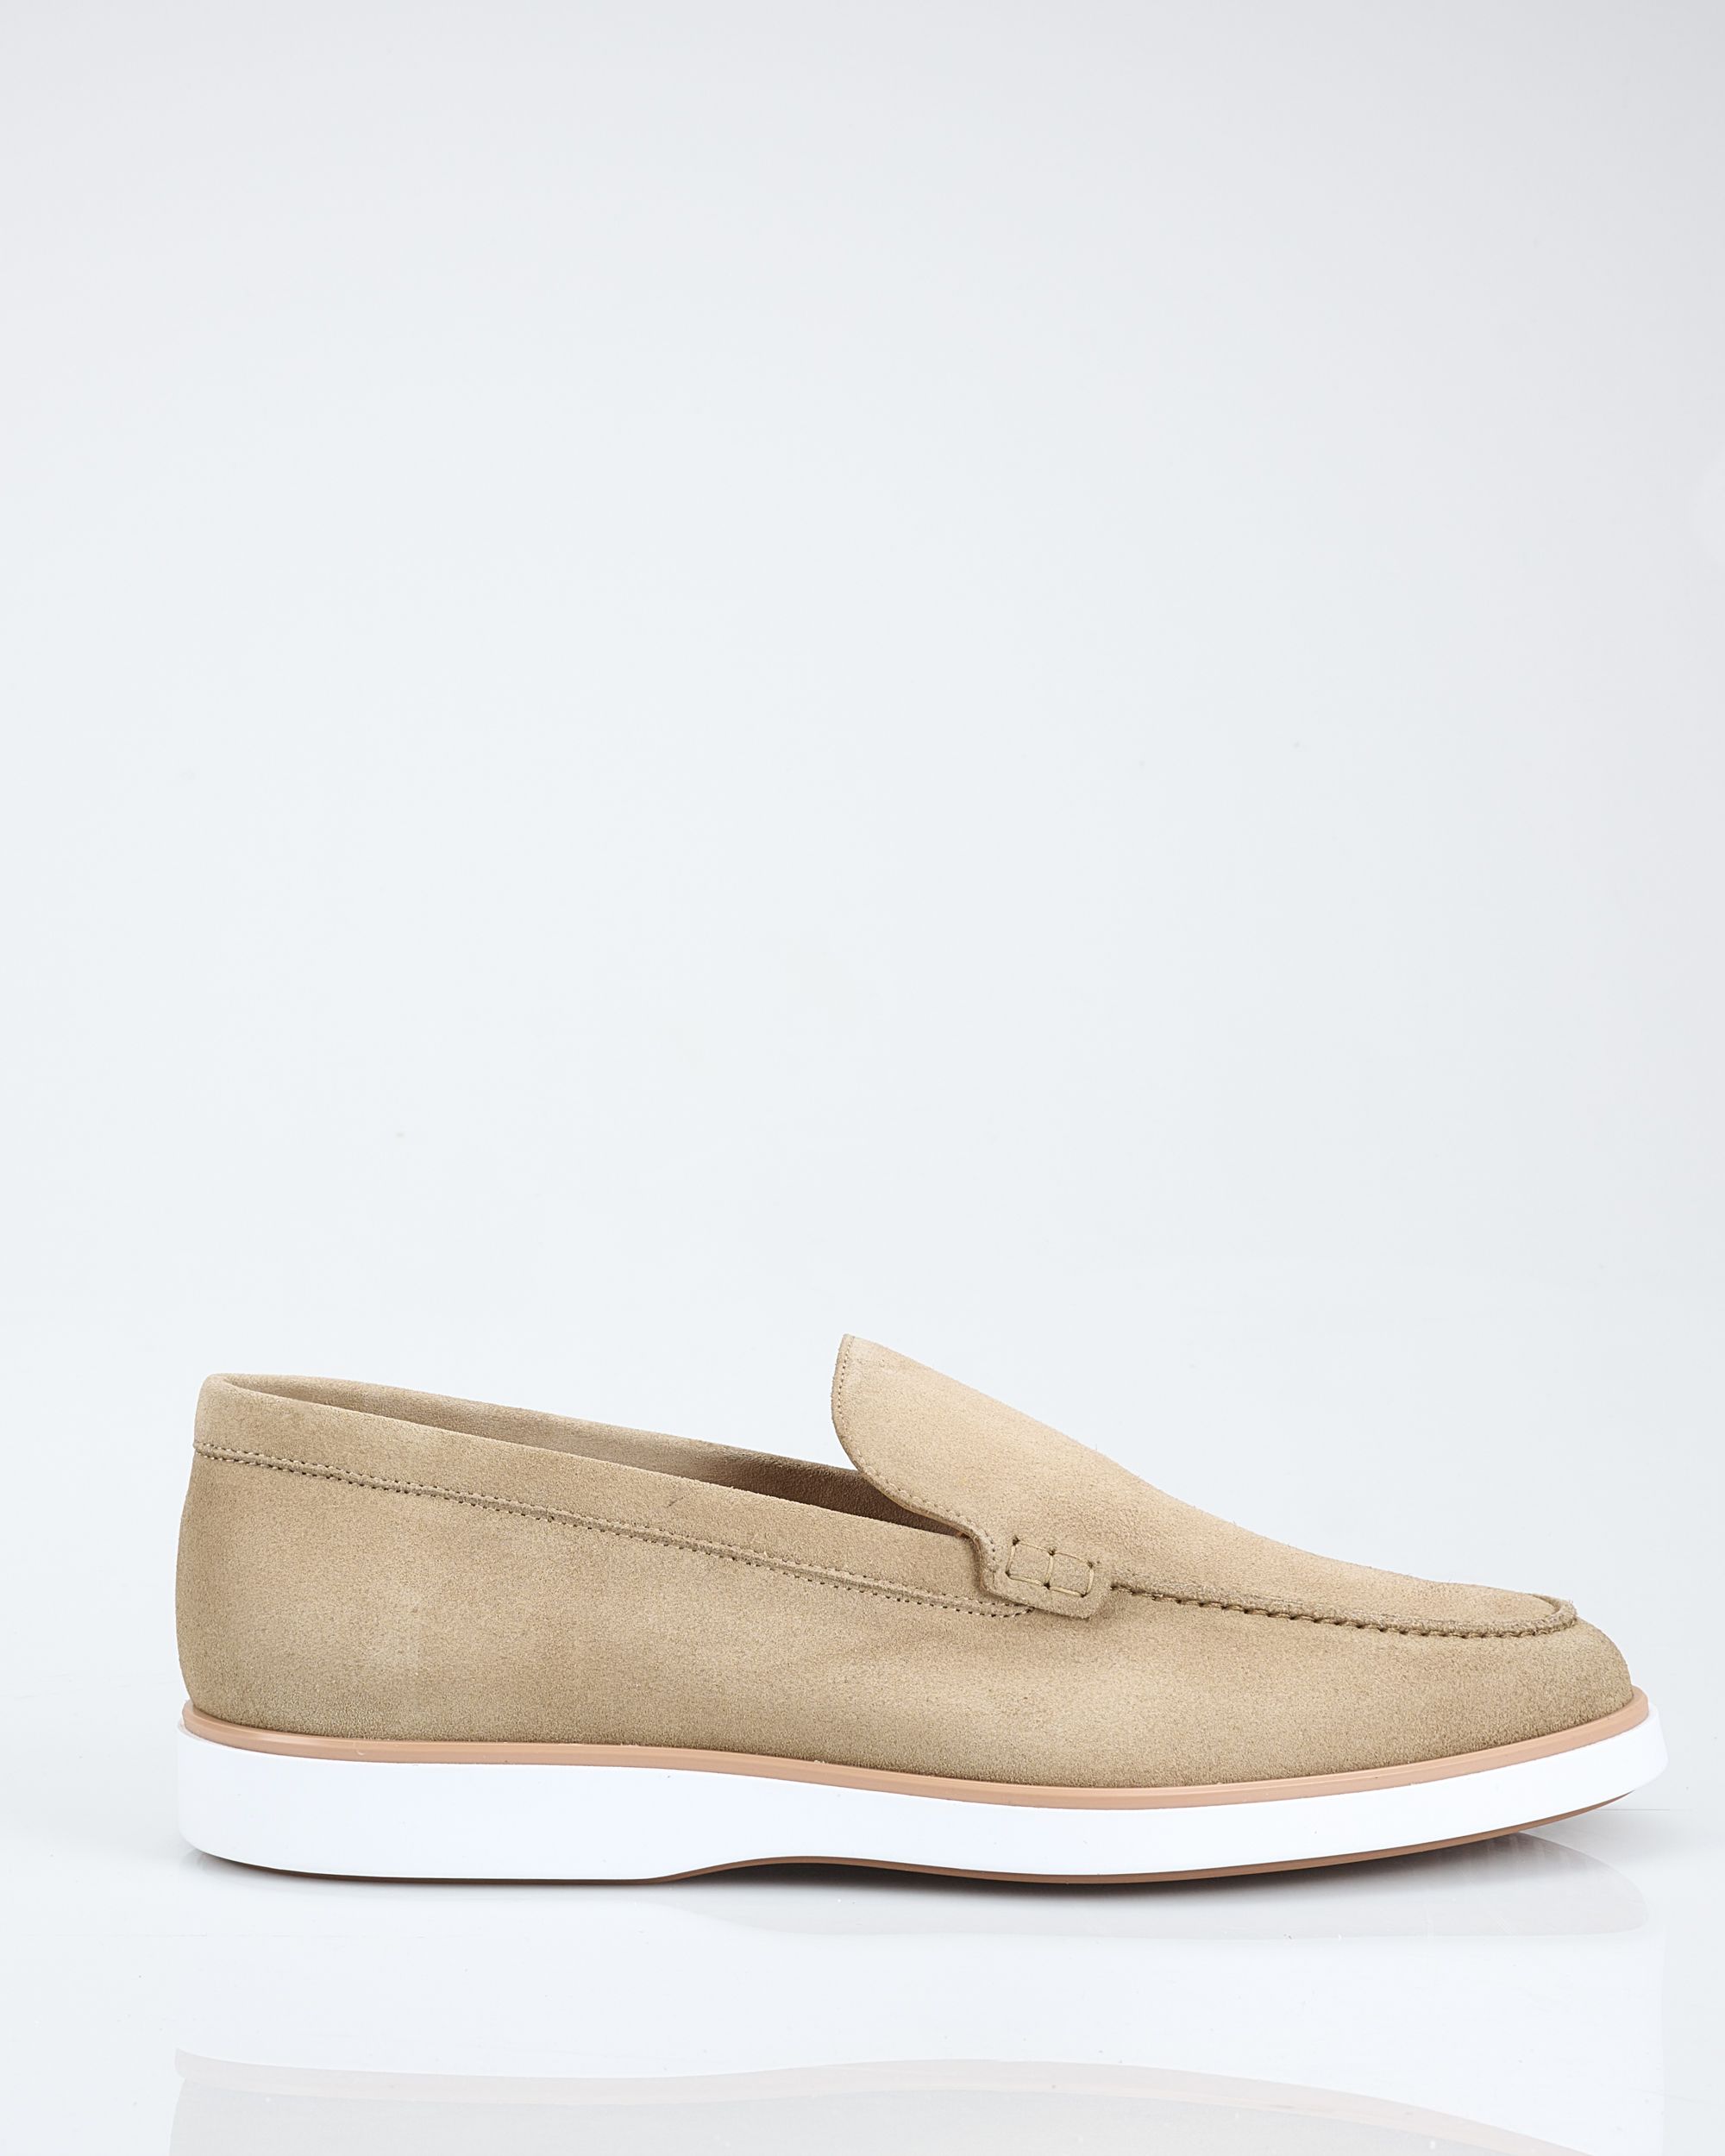 Magnanni Loafers Sand 084916-001-41